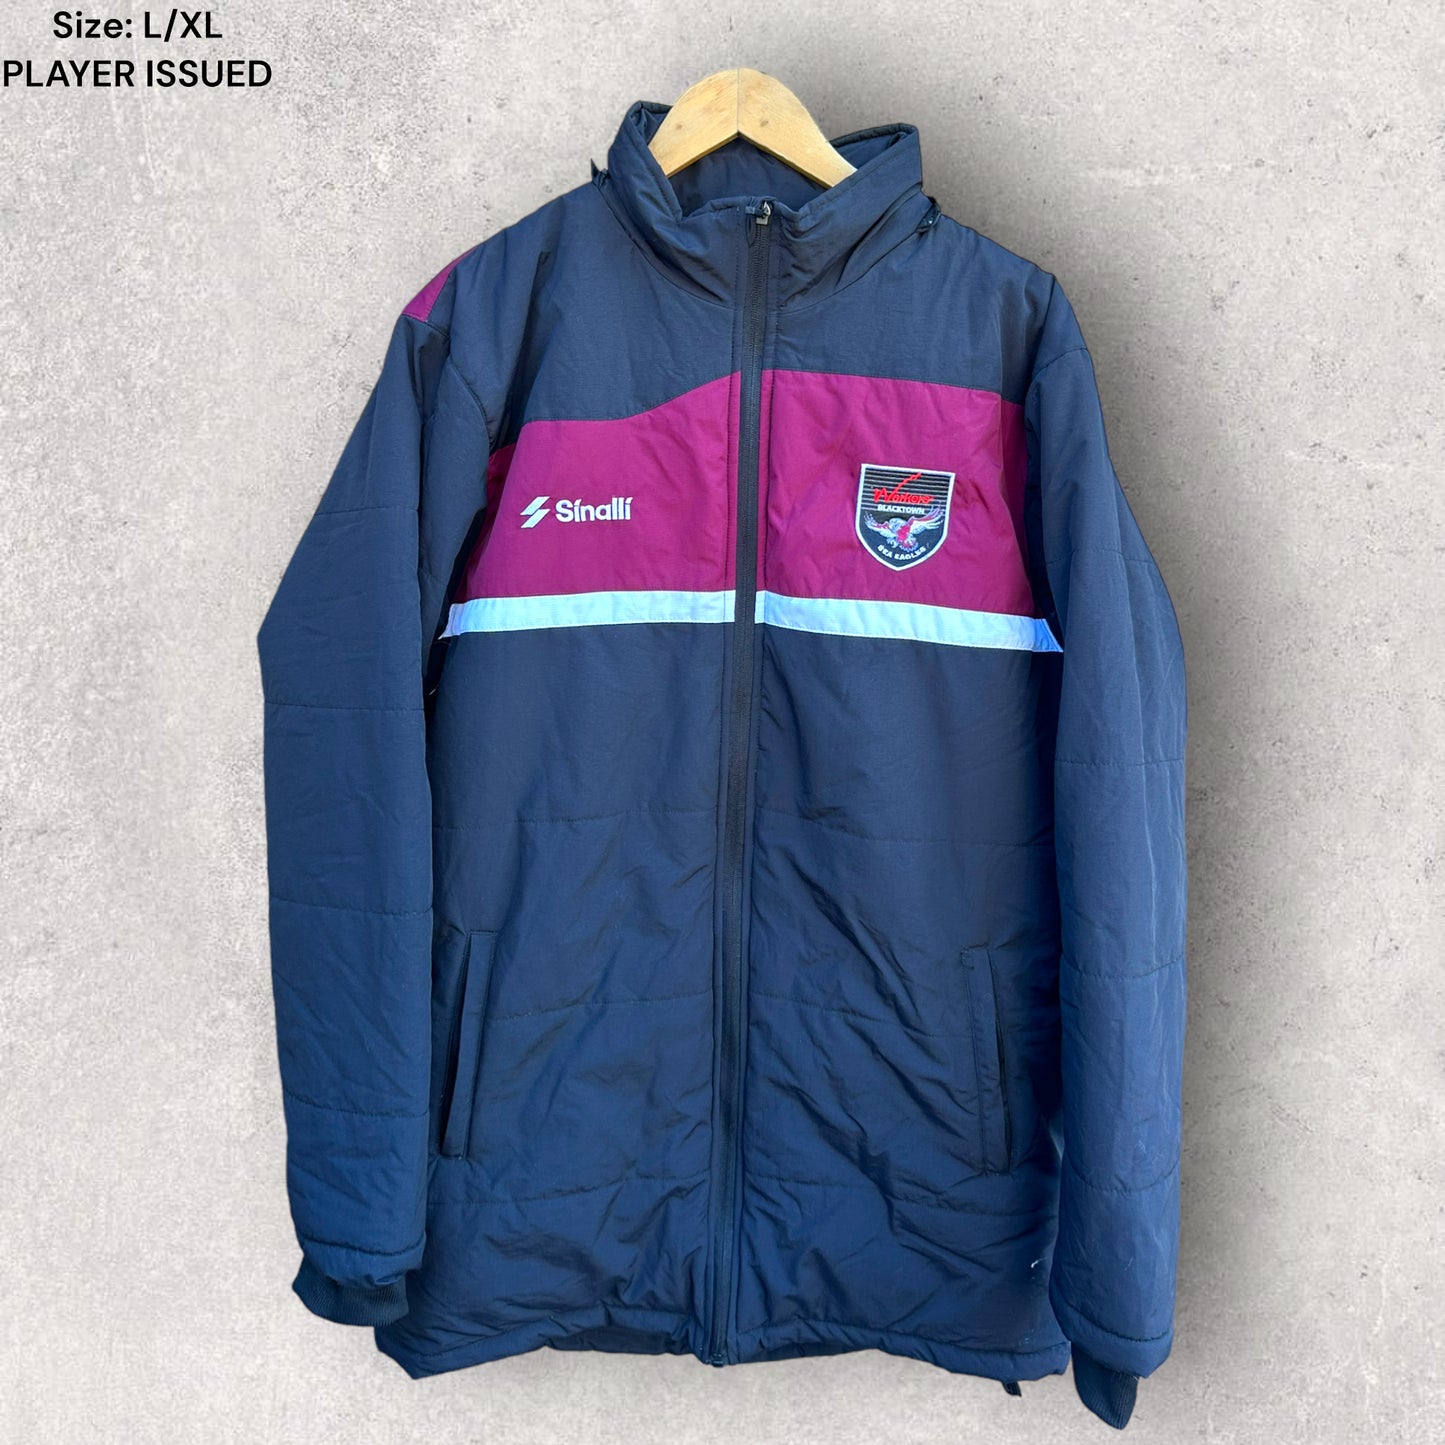 BLACKTOWN WORKERS SEA EAGLES PLAYER WORN BENCH PUFFER JACKET